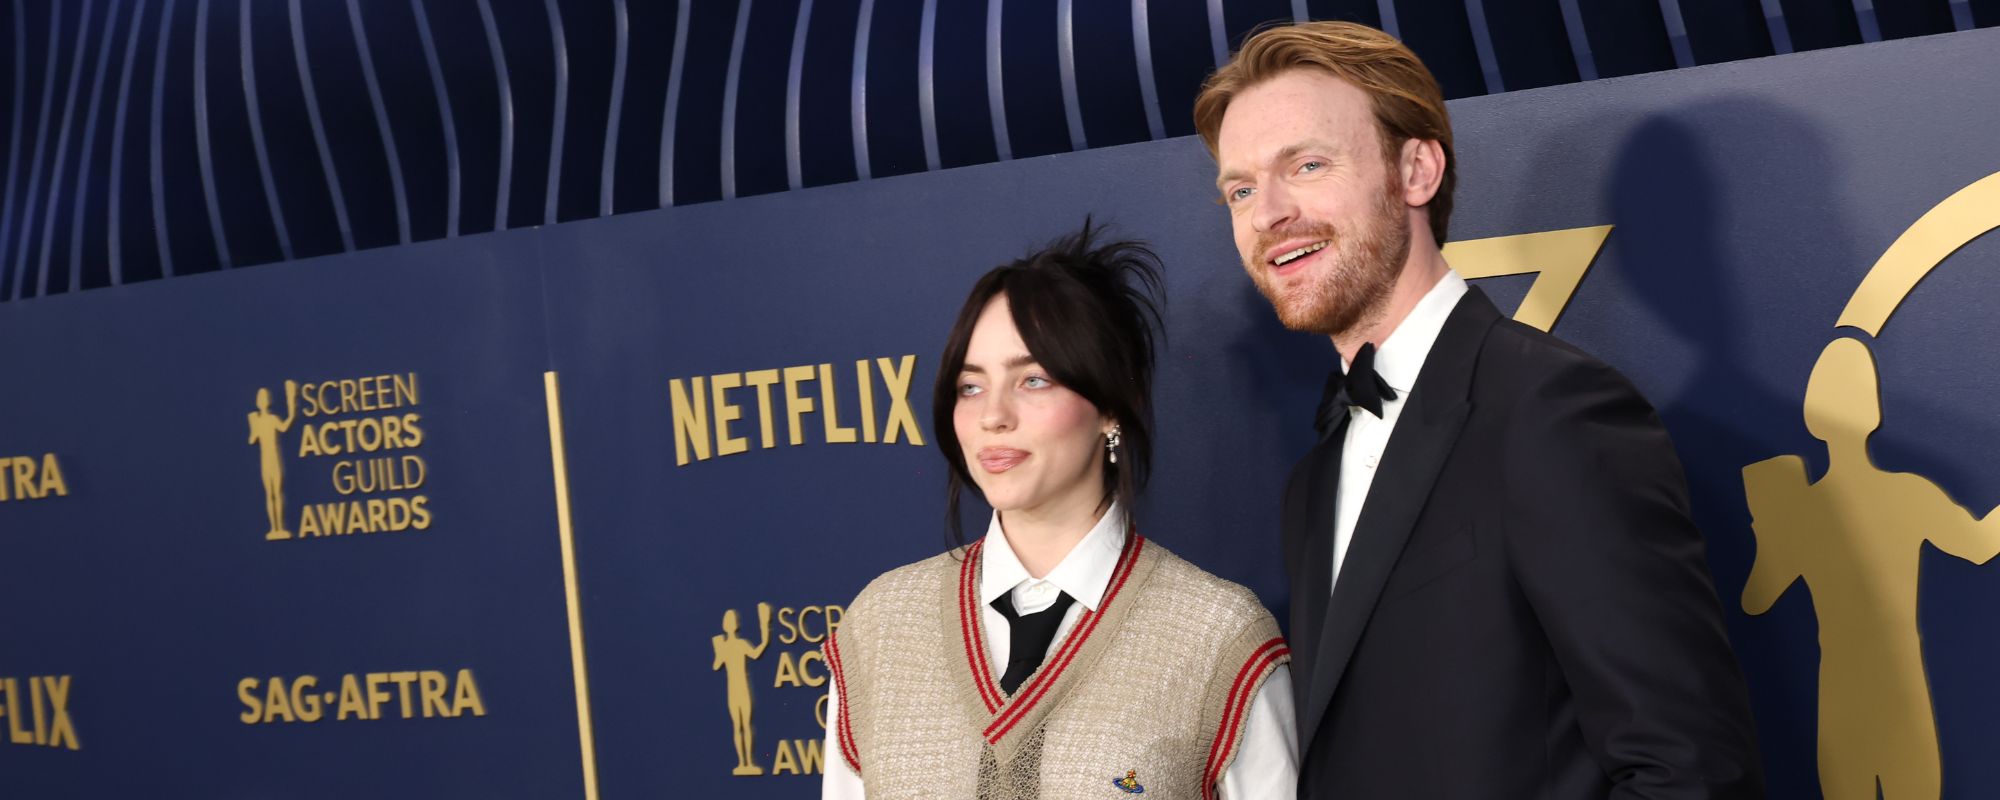 3 Quick Facts About Finneas O’Connell—Billie Eilish’s Brother and “What Was I Made For?” Collaborator